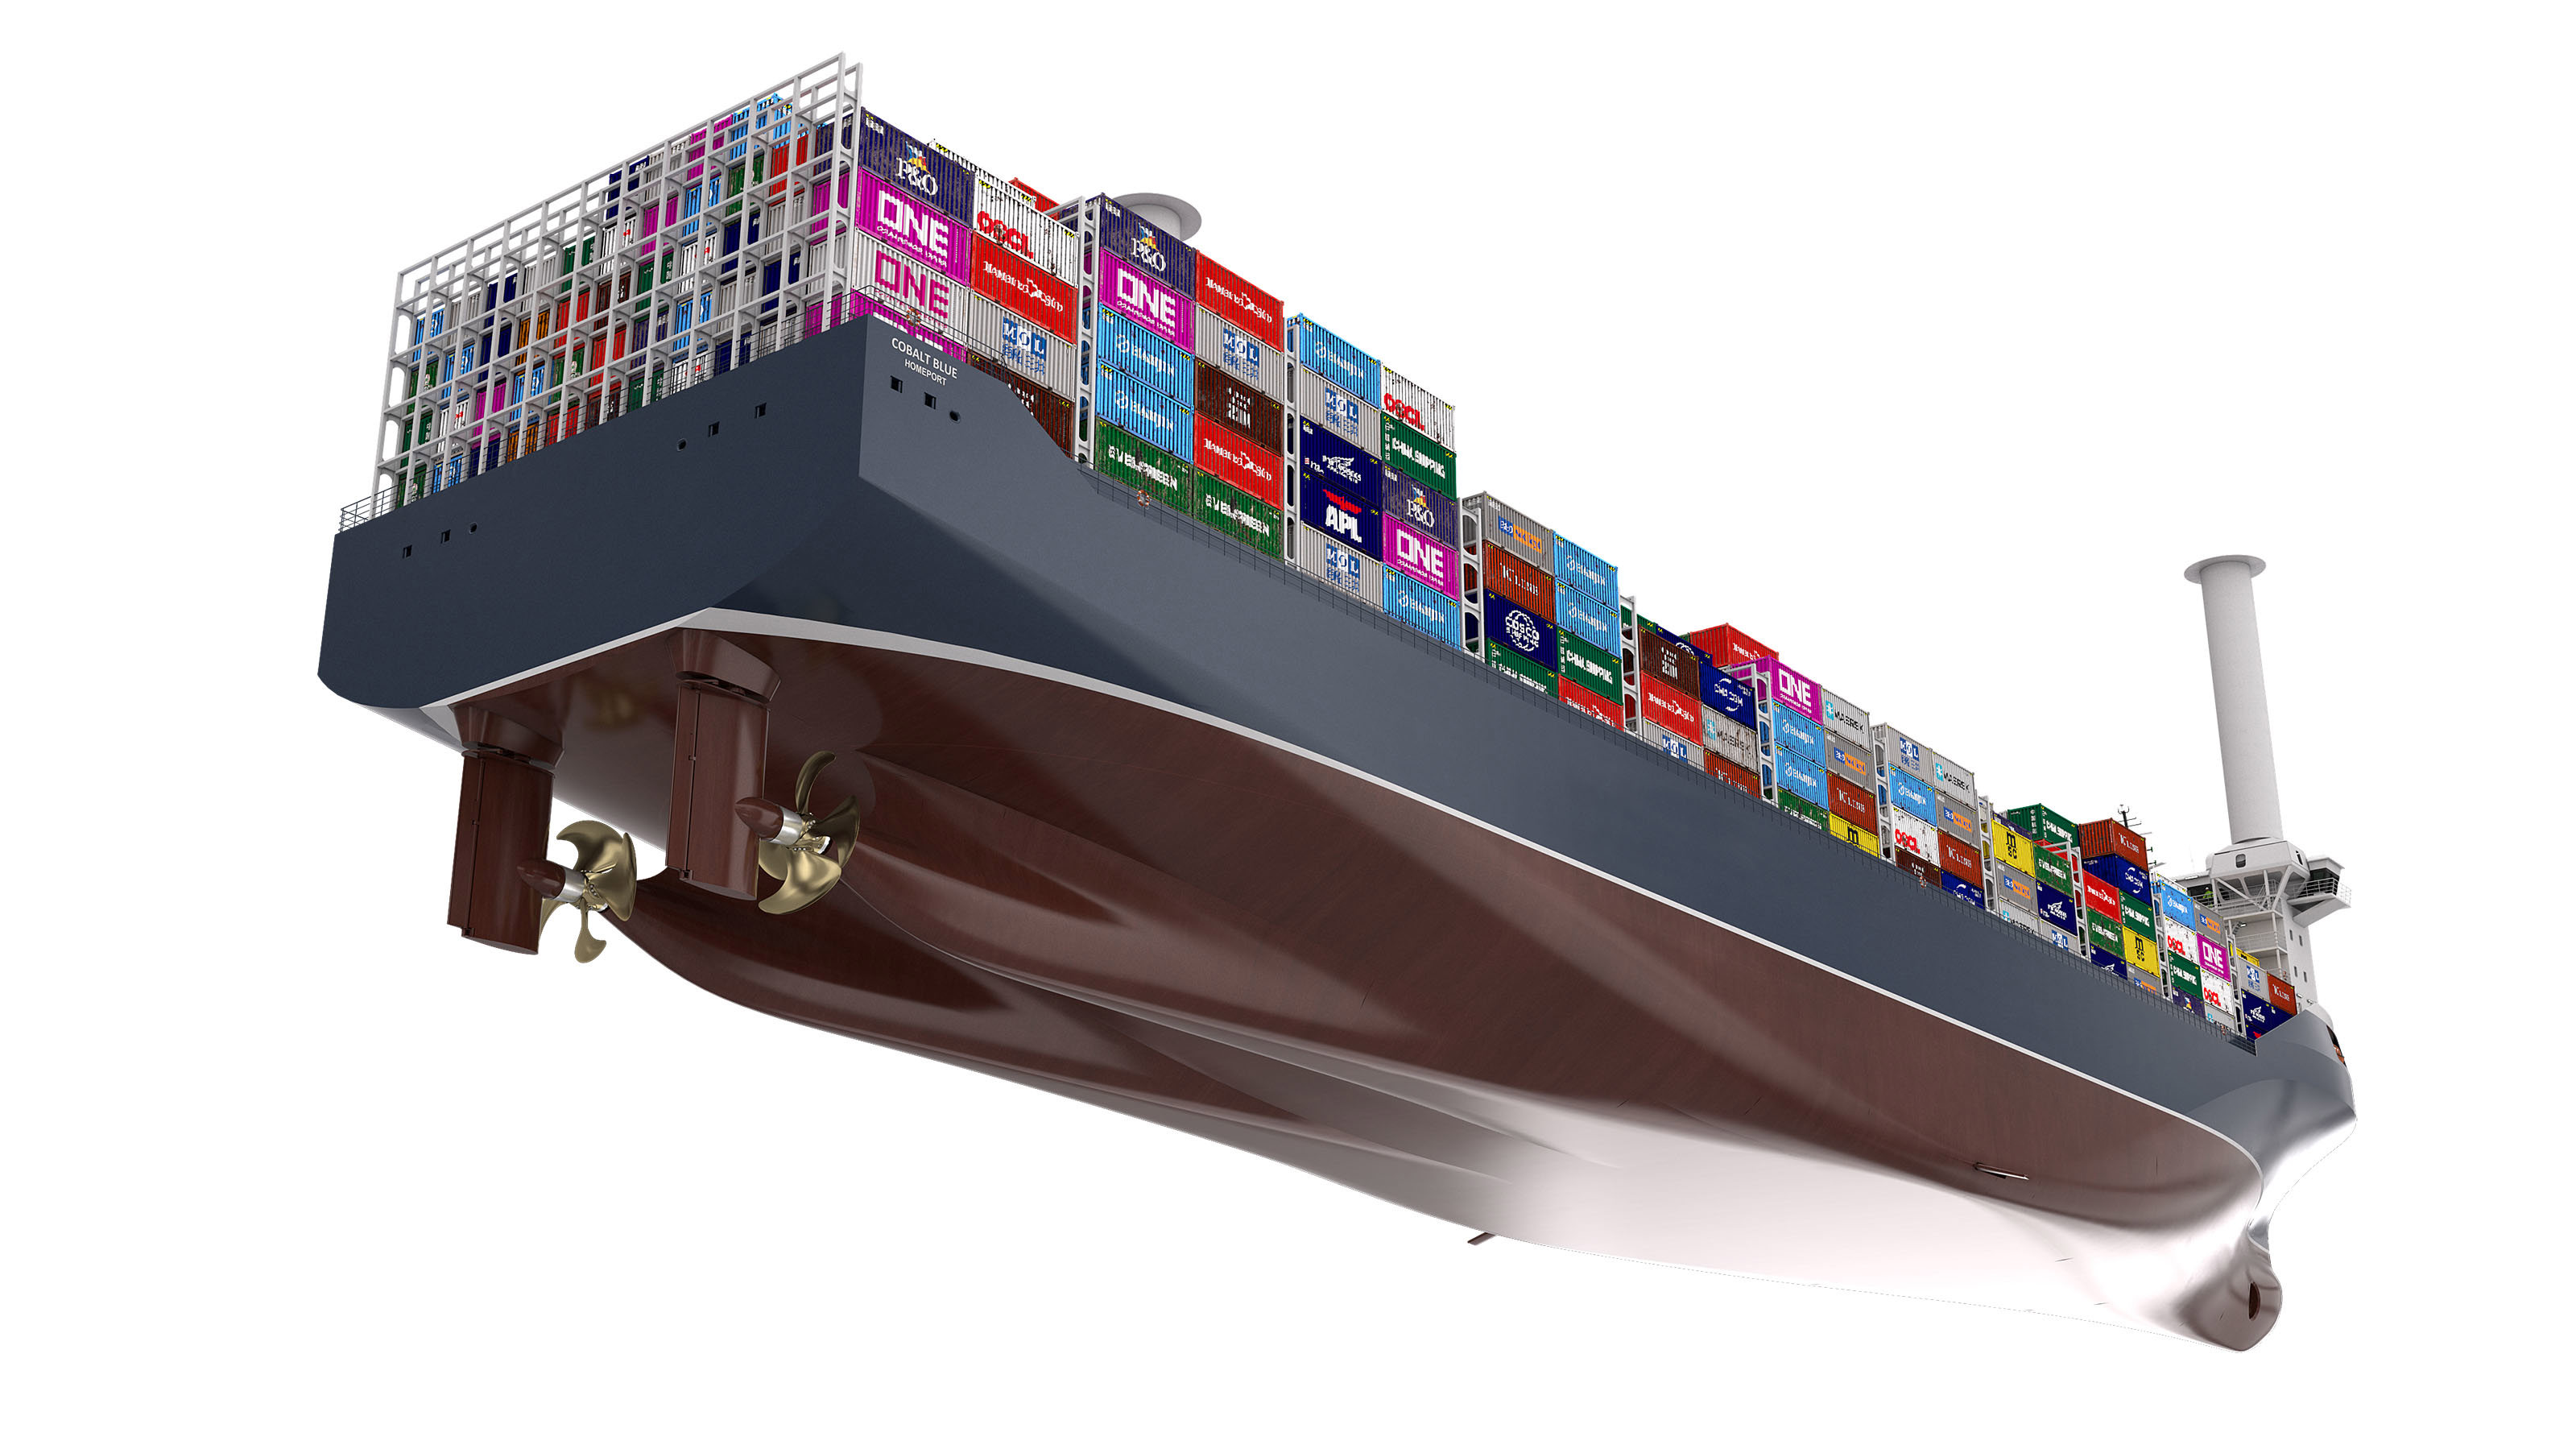 A future for container vessels that thinks outside the box - Kongsberg  Maritime